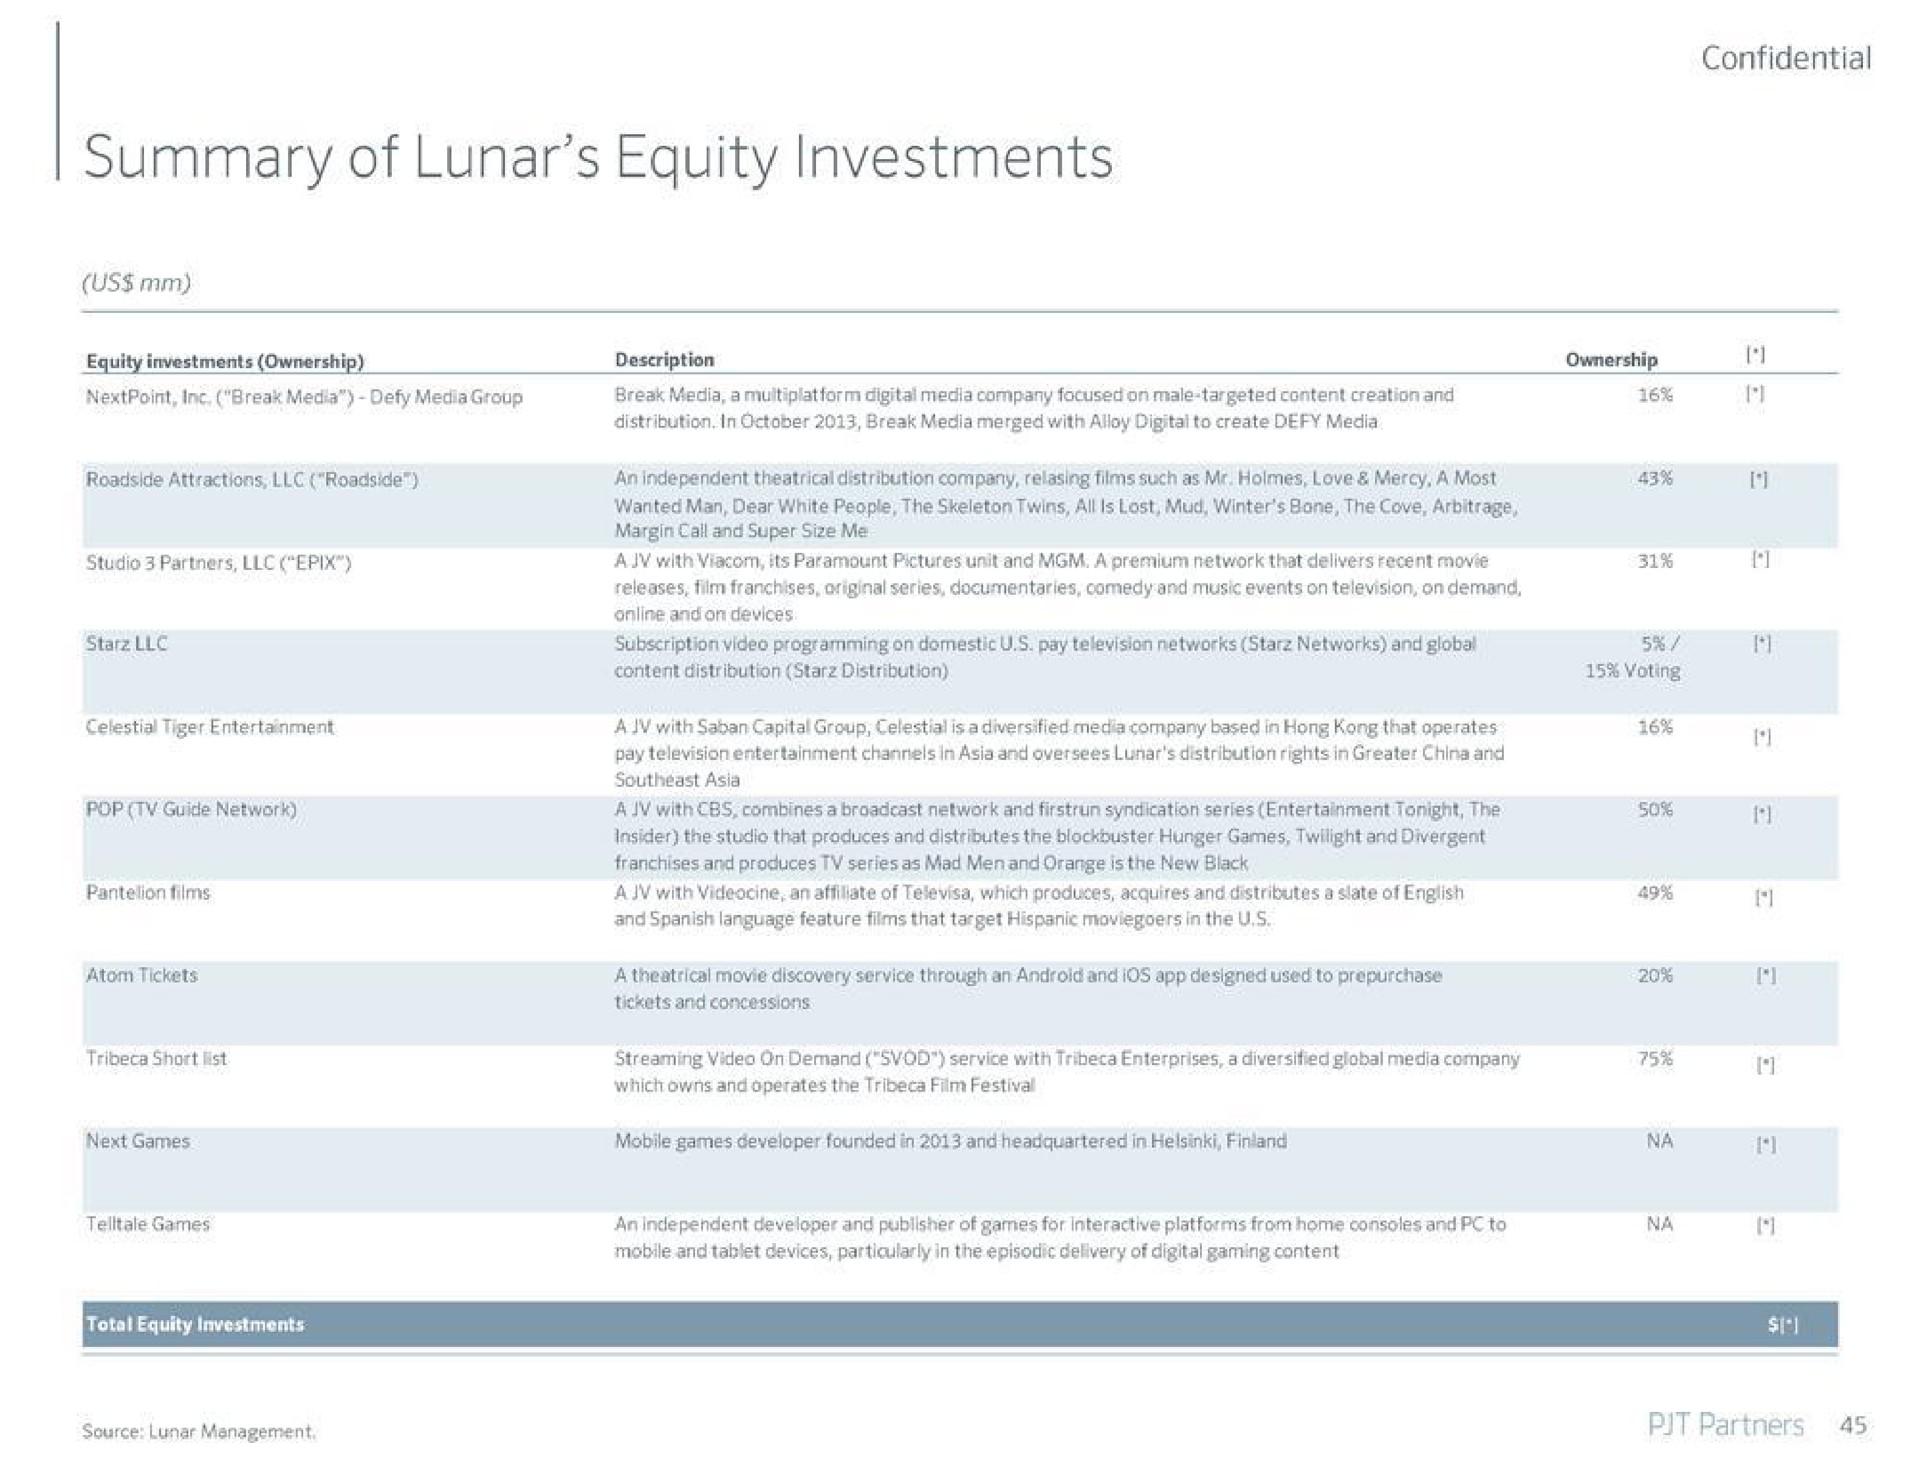 summary of lunar equity investments | PJT Partners